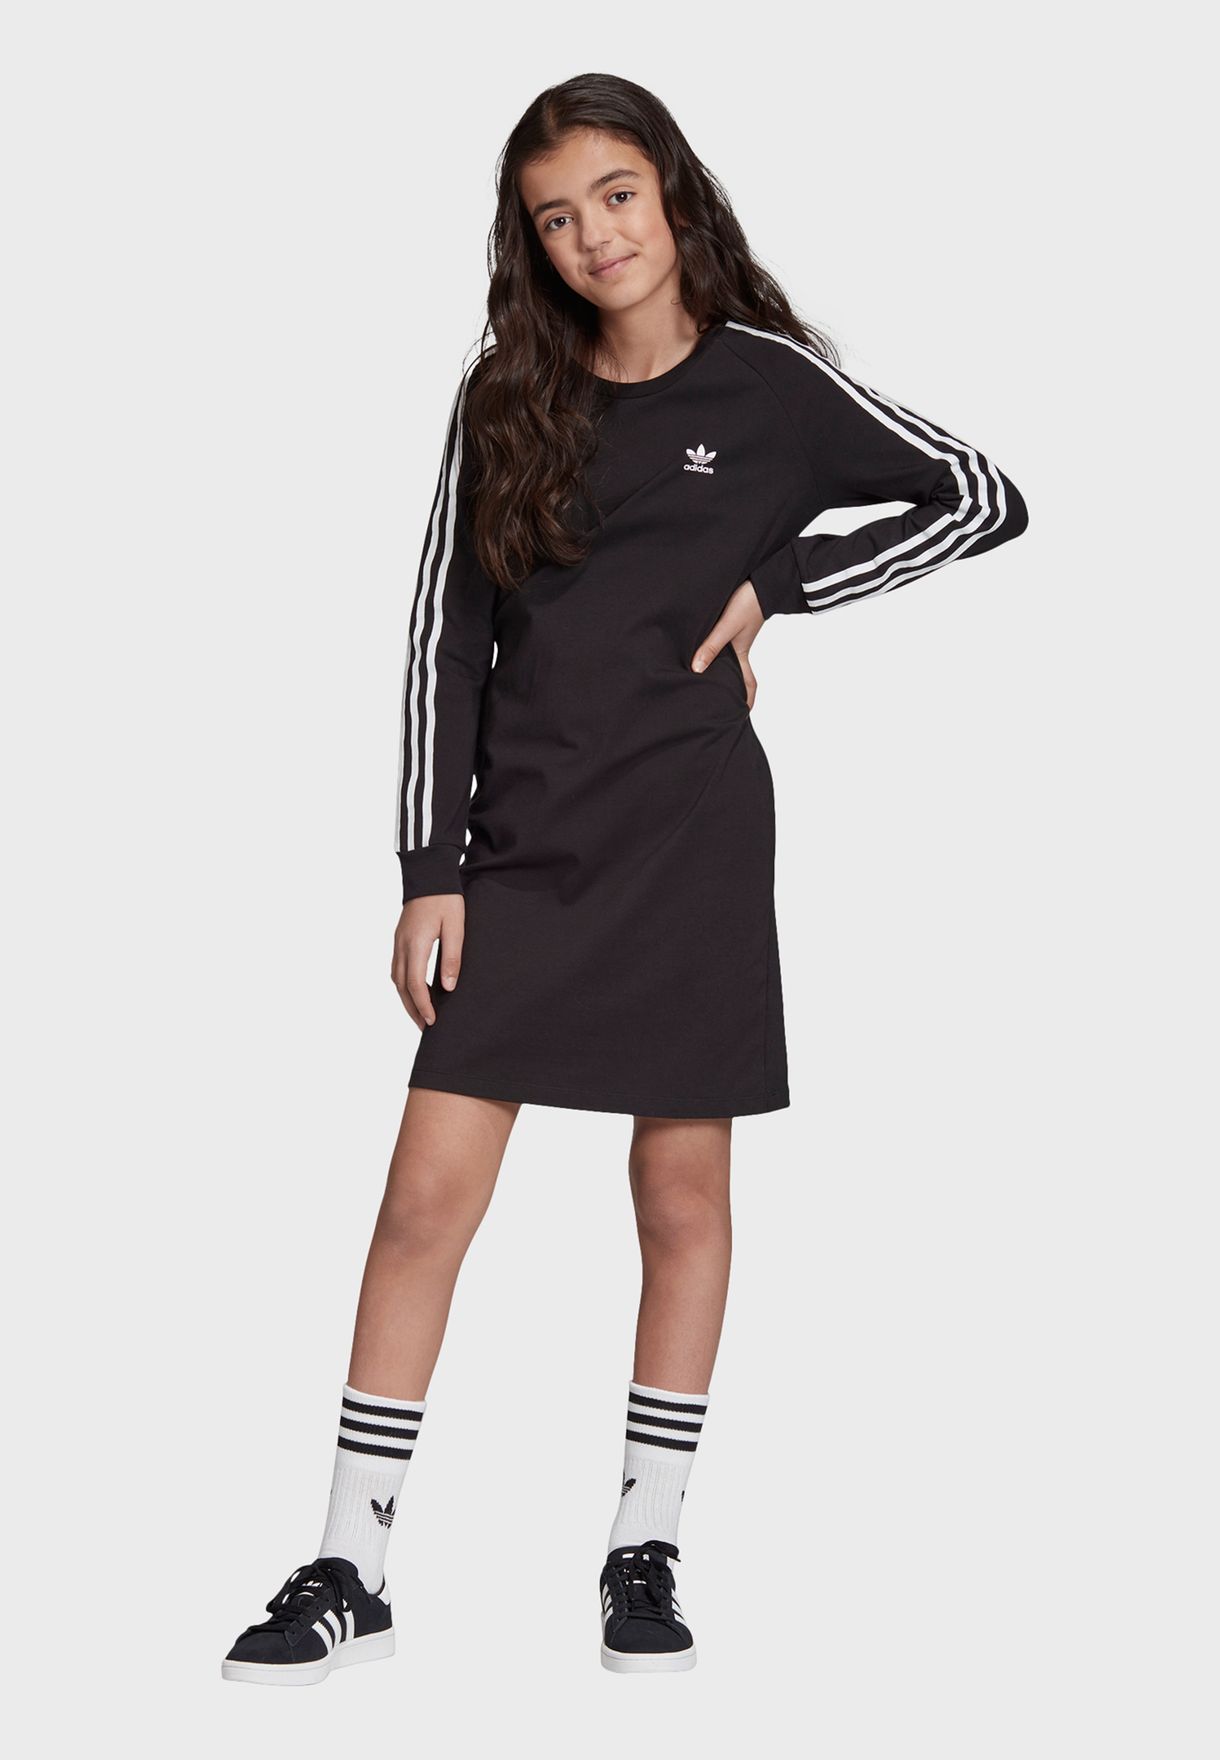 adidas 3 stripe outfit